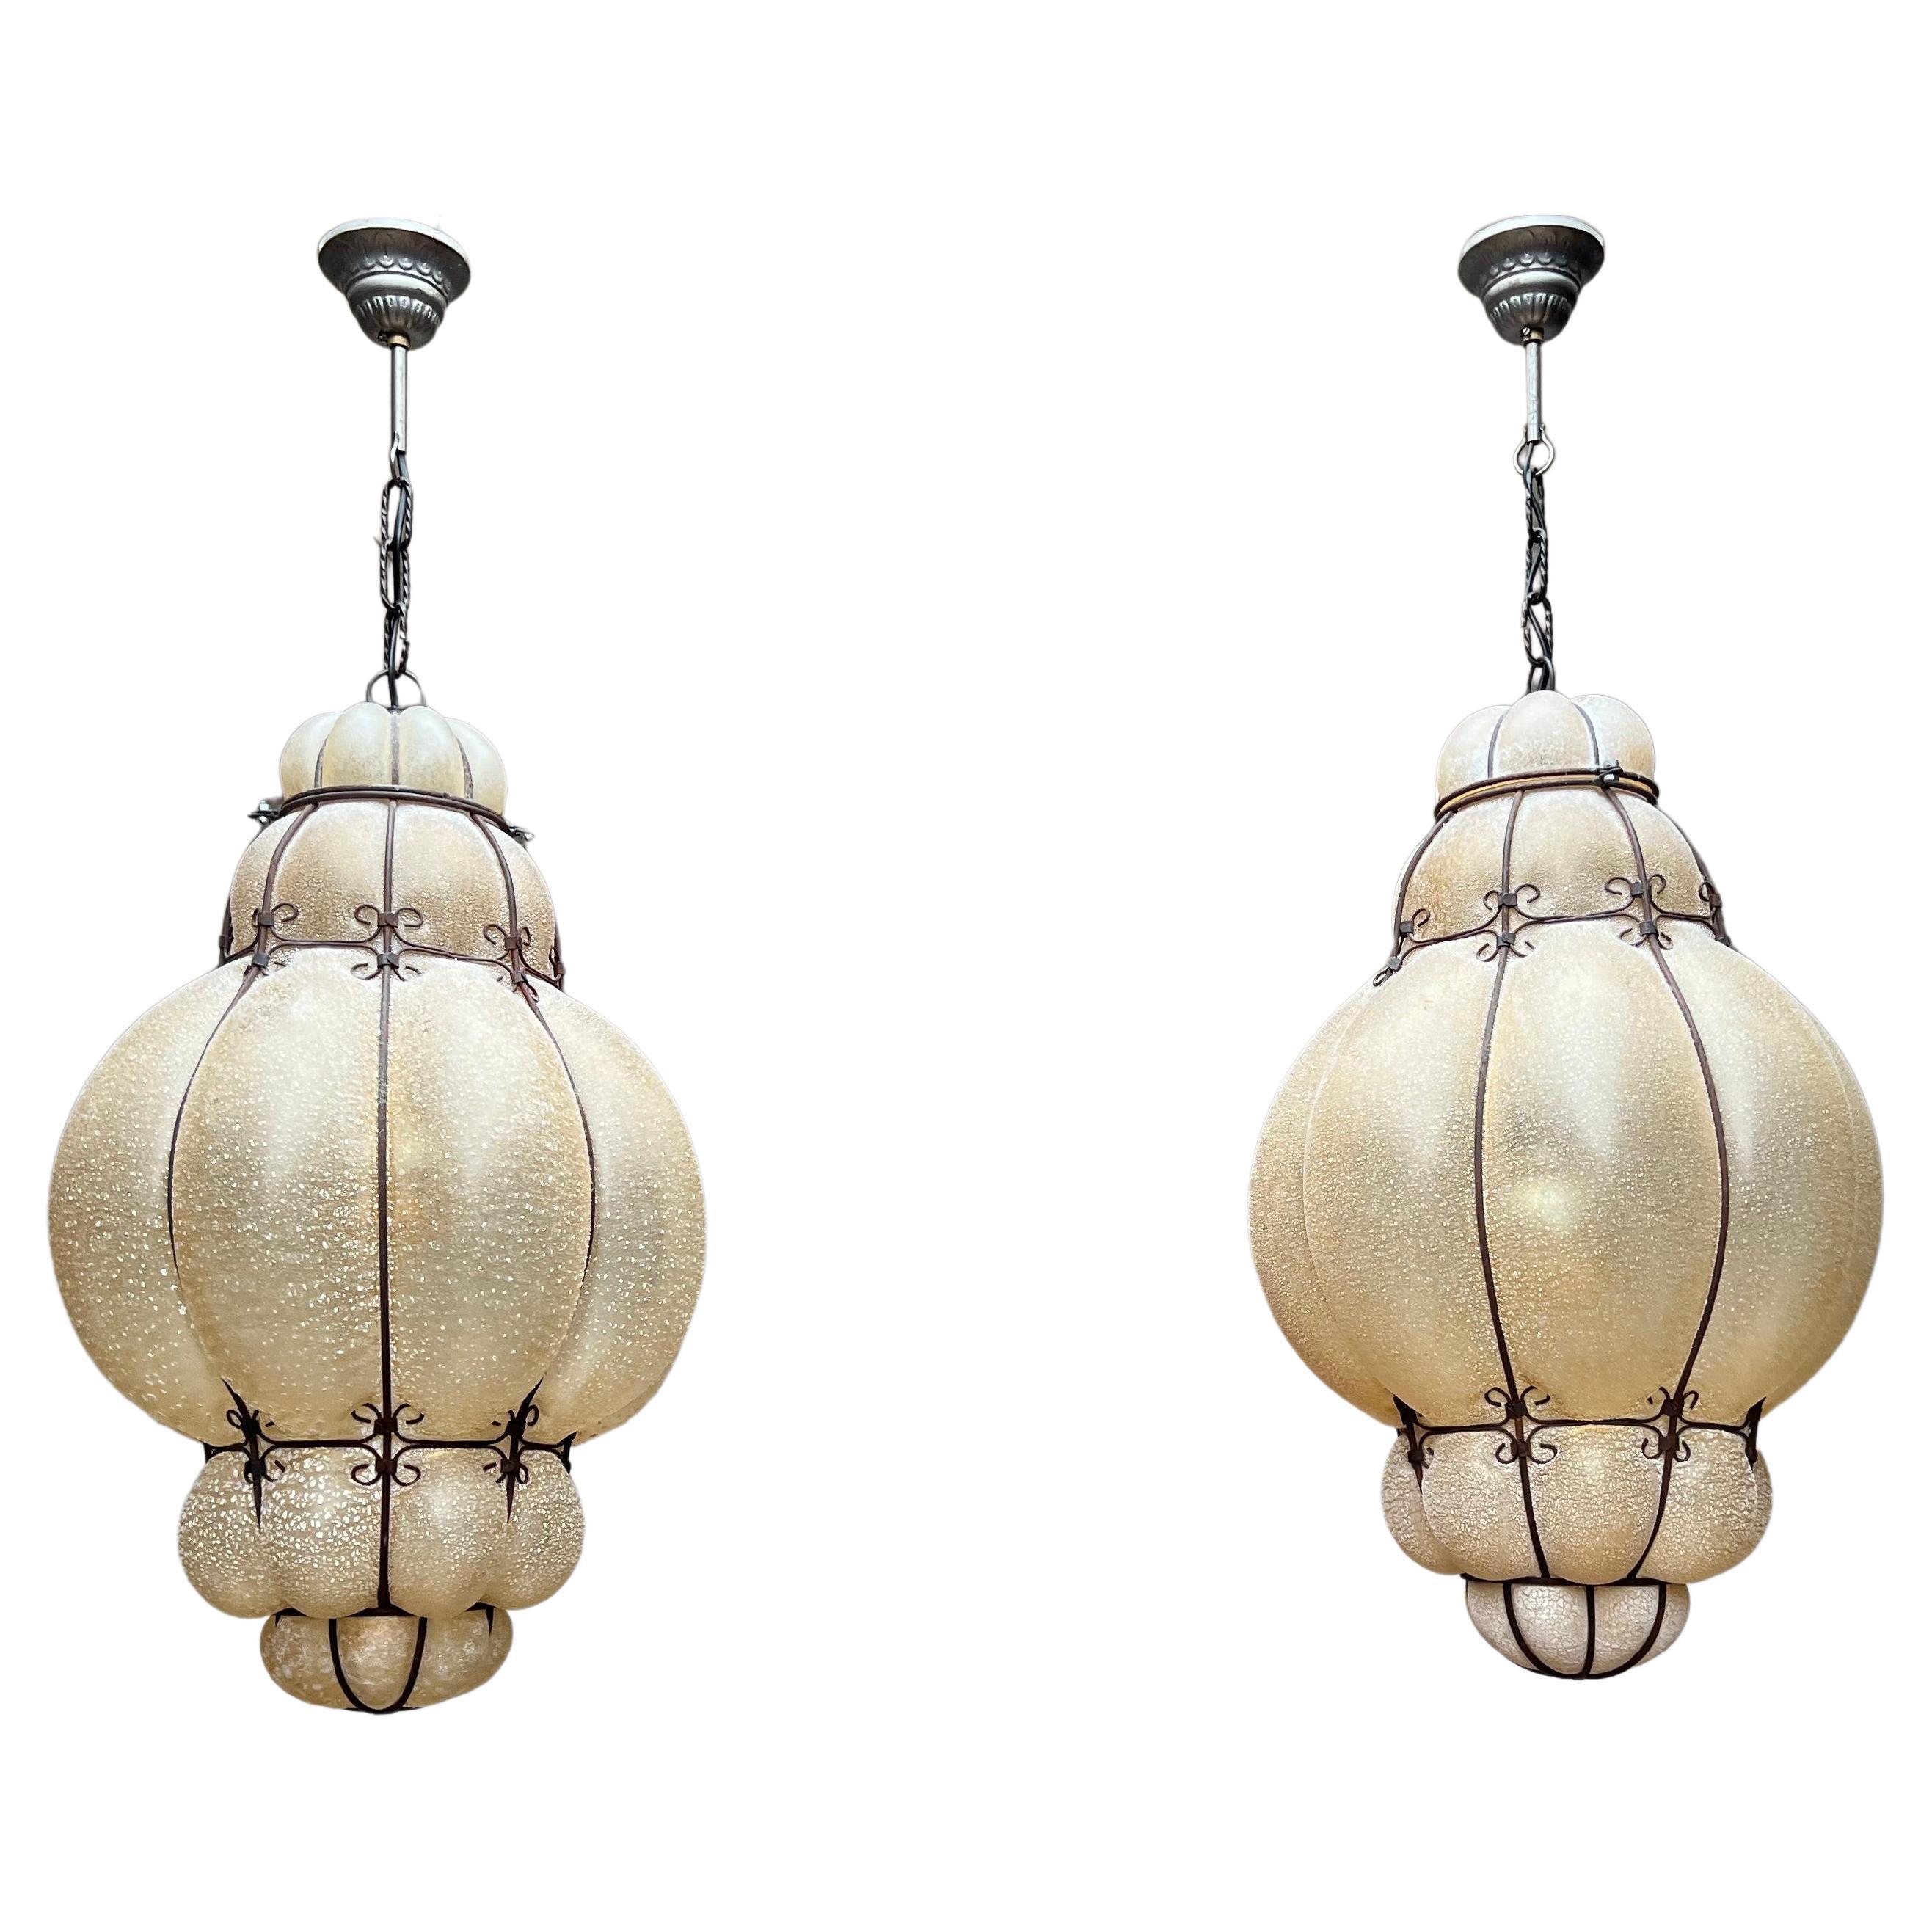 Large Pair of Venetian Pendants, Mouth Blown Amber Glass in Wrought Iron Frame 